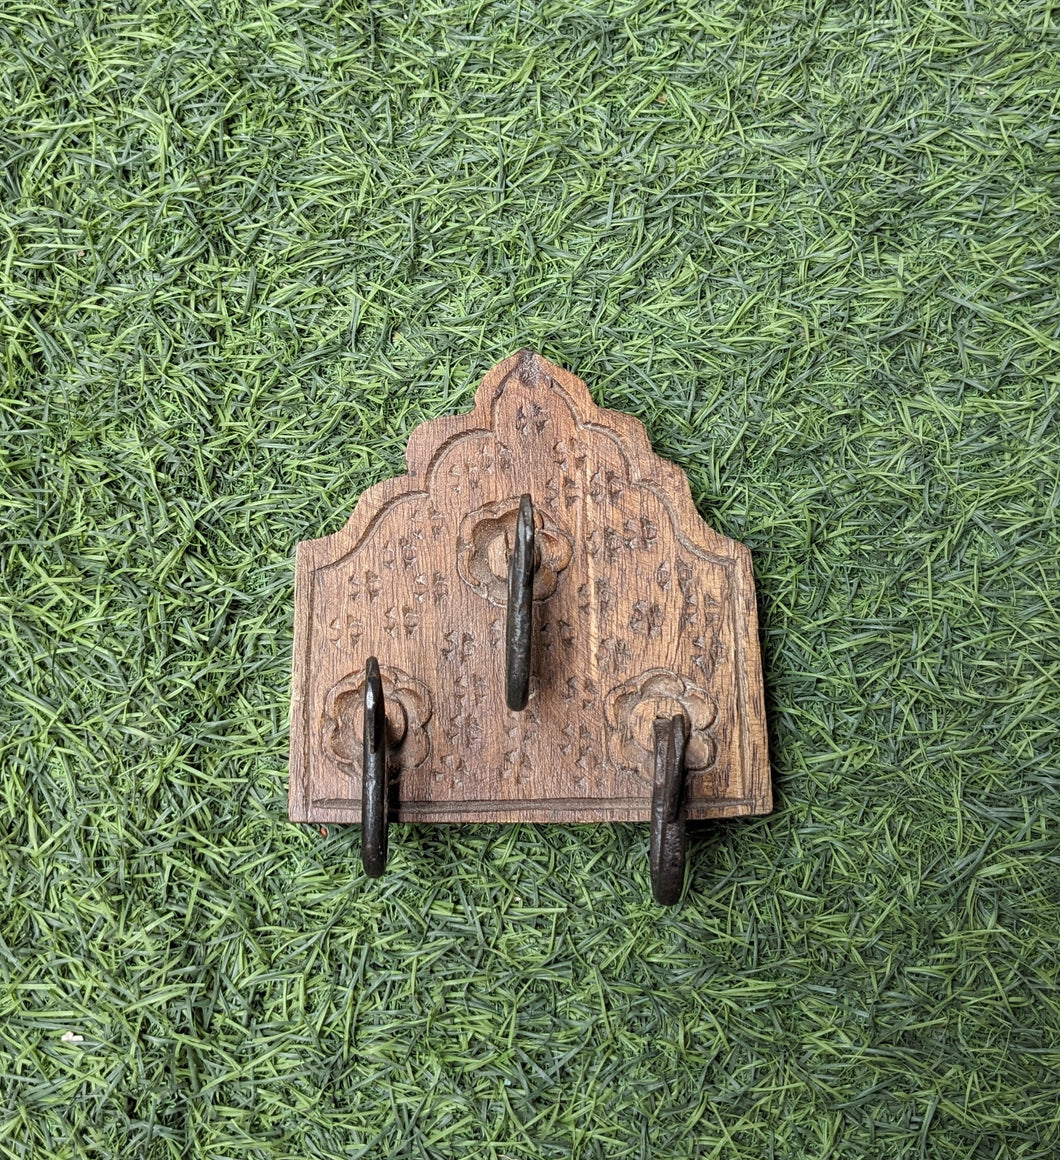 Carved Wood with three hooks